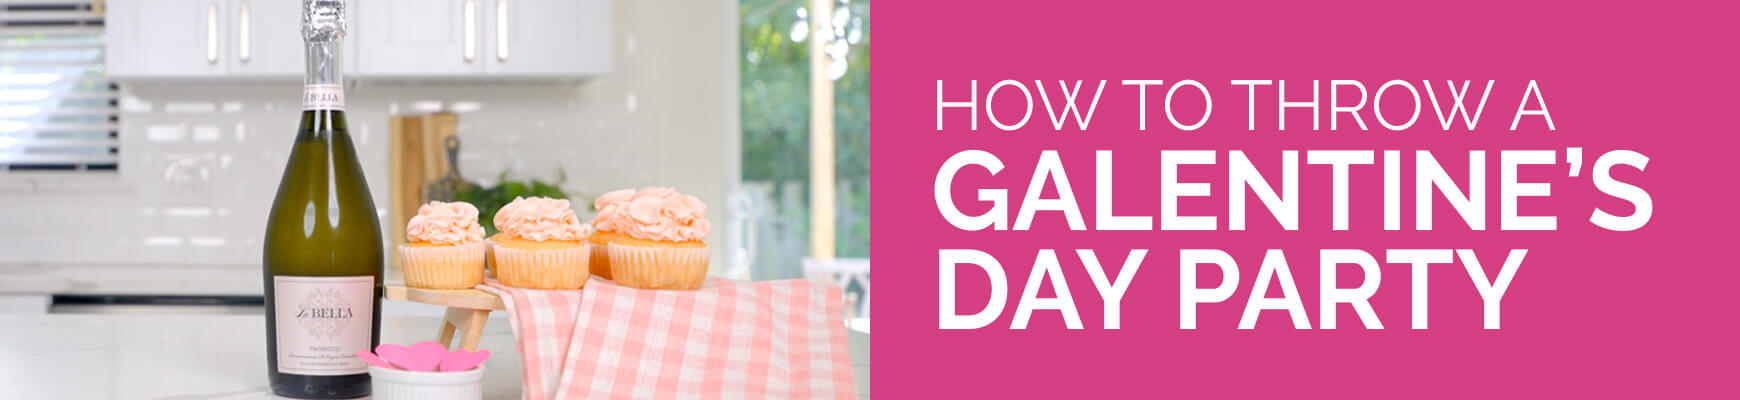 How to Throw a Galentine's Day Party